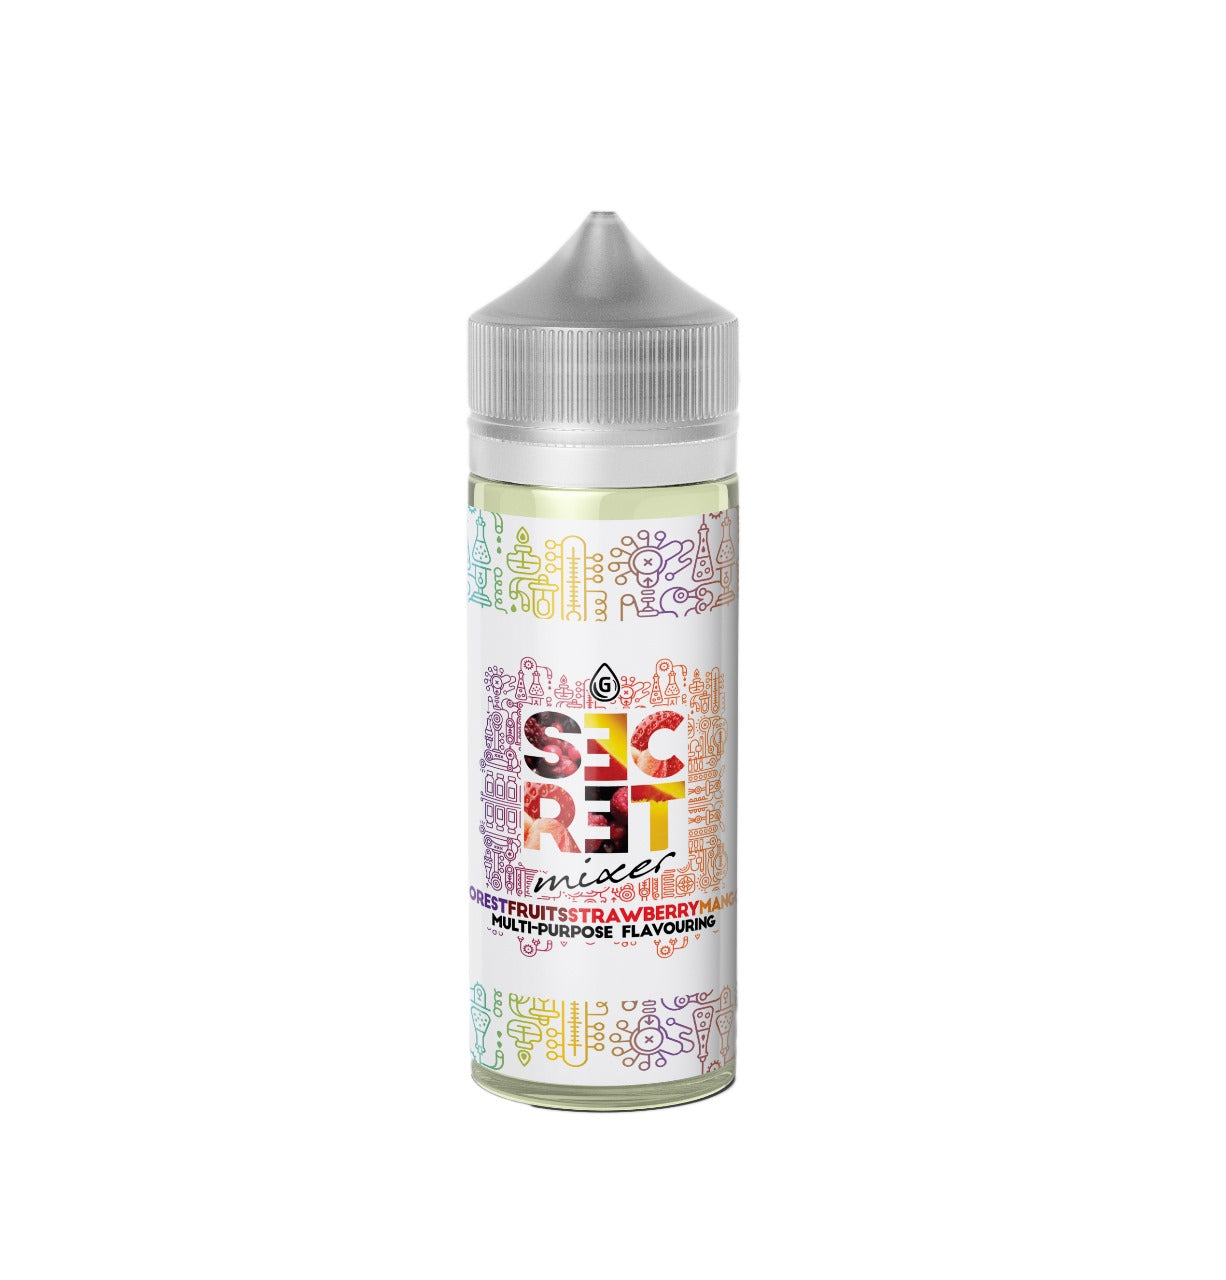 G-Drops: Secret Mixer Longfill - Forrest Fruits Strawberry Mango Flavouring